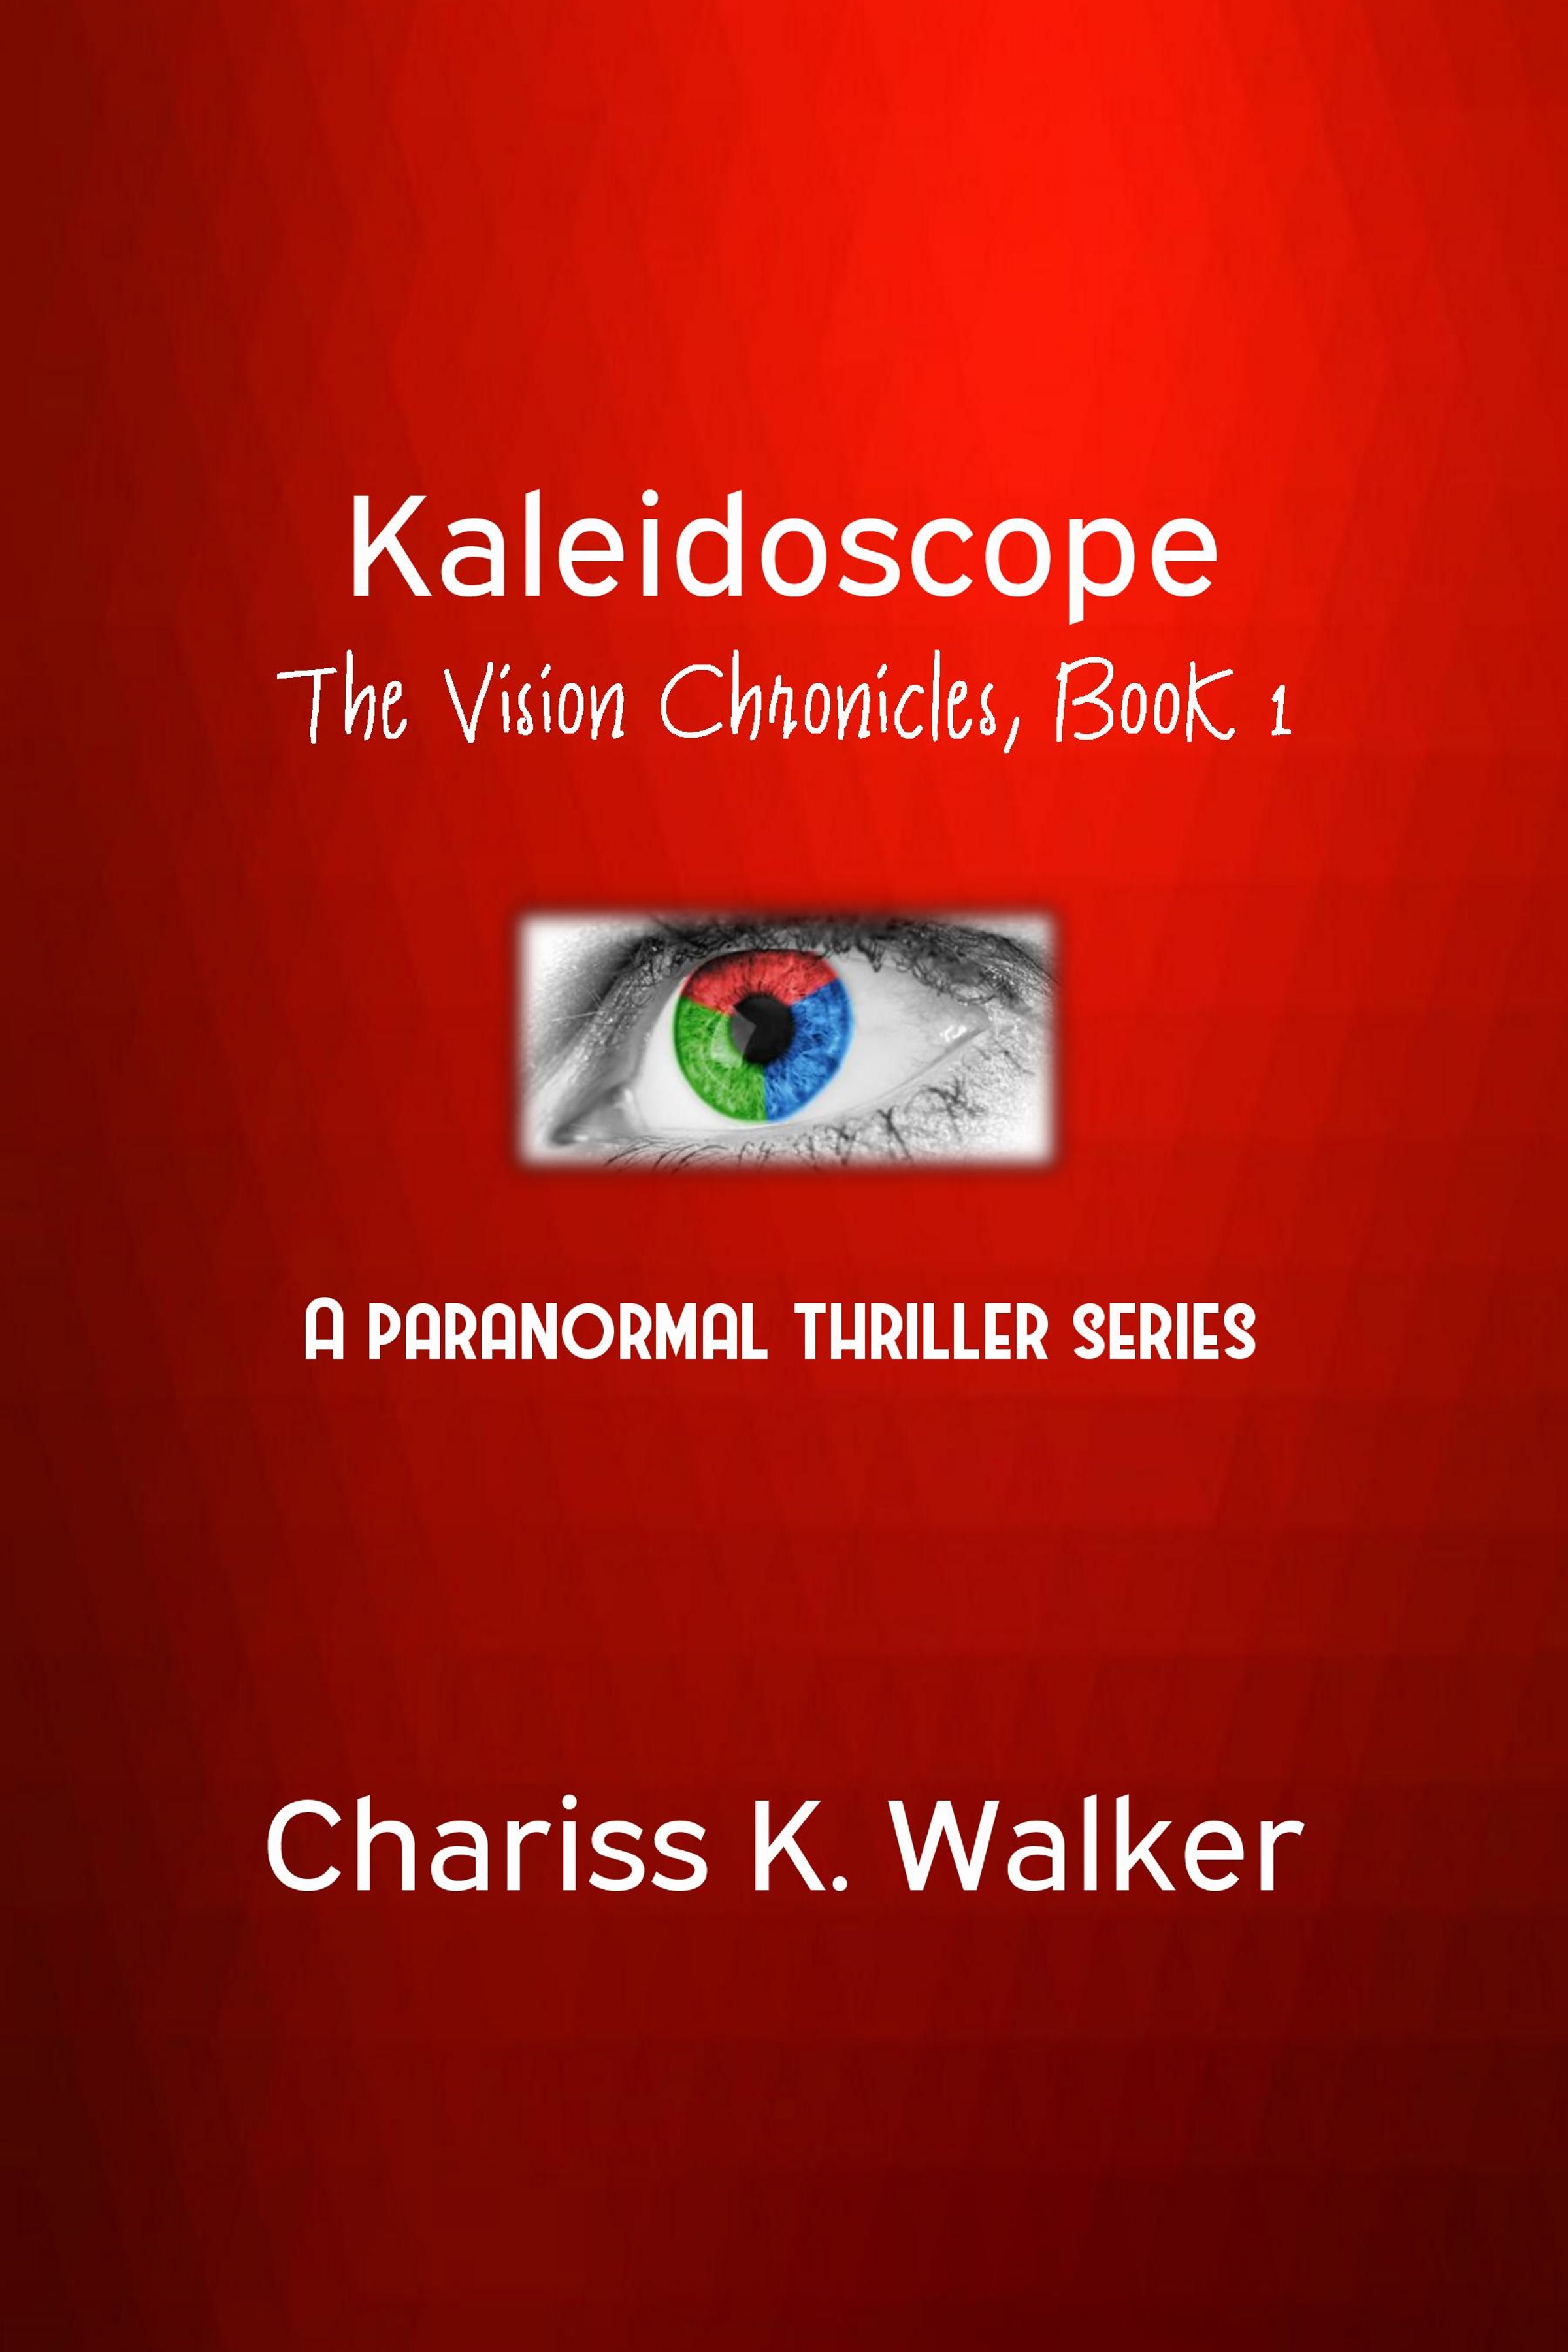 FREE: Kaleidoscope (The Vision Chronicles, Book 1) by Chariss K Walker